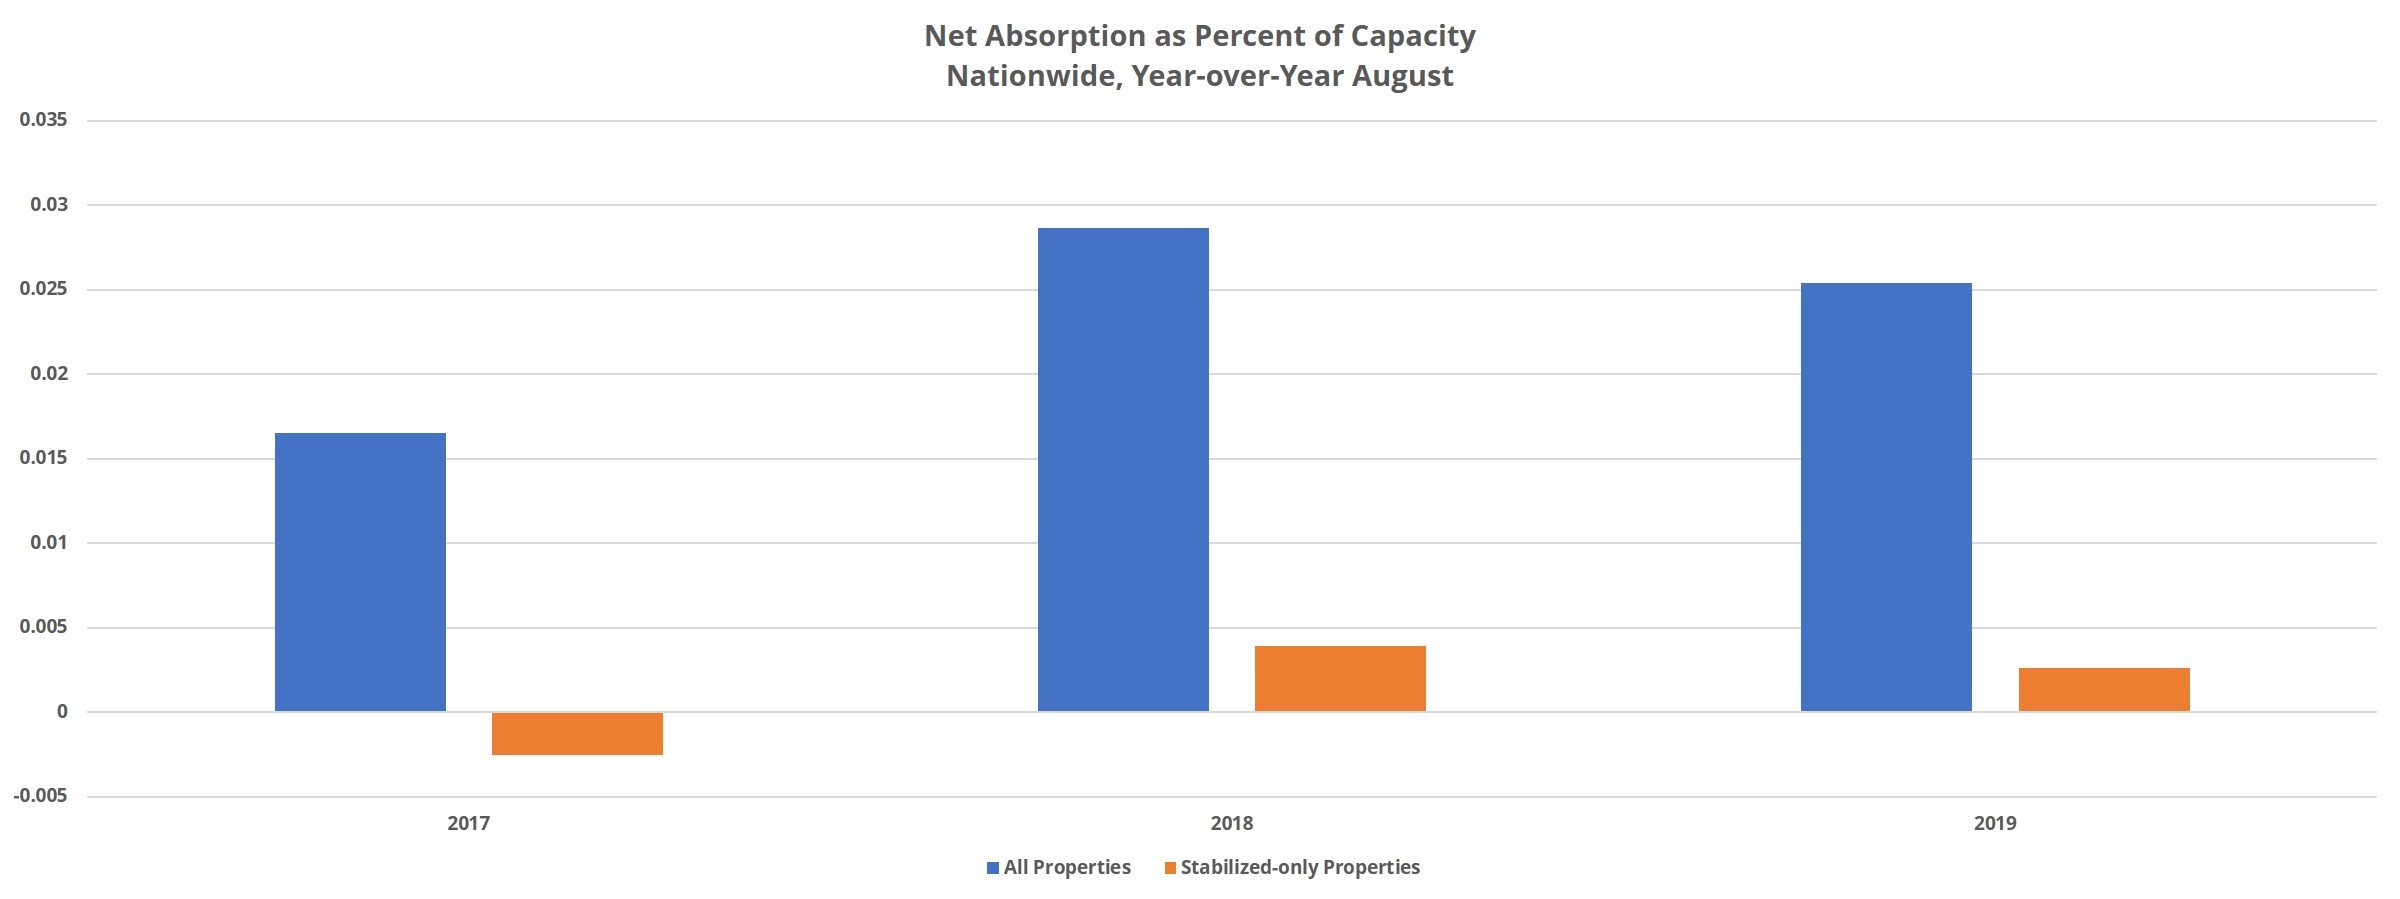 Net Absorption as Percent of Capacity Nationwide Year-Over-Year August